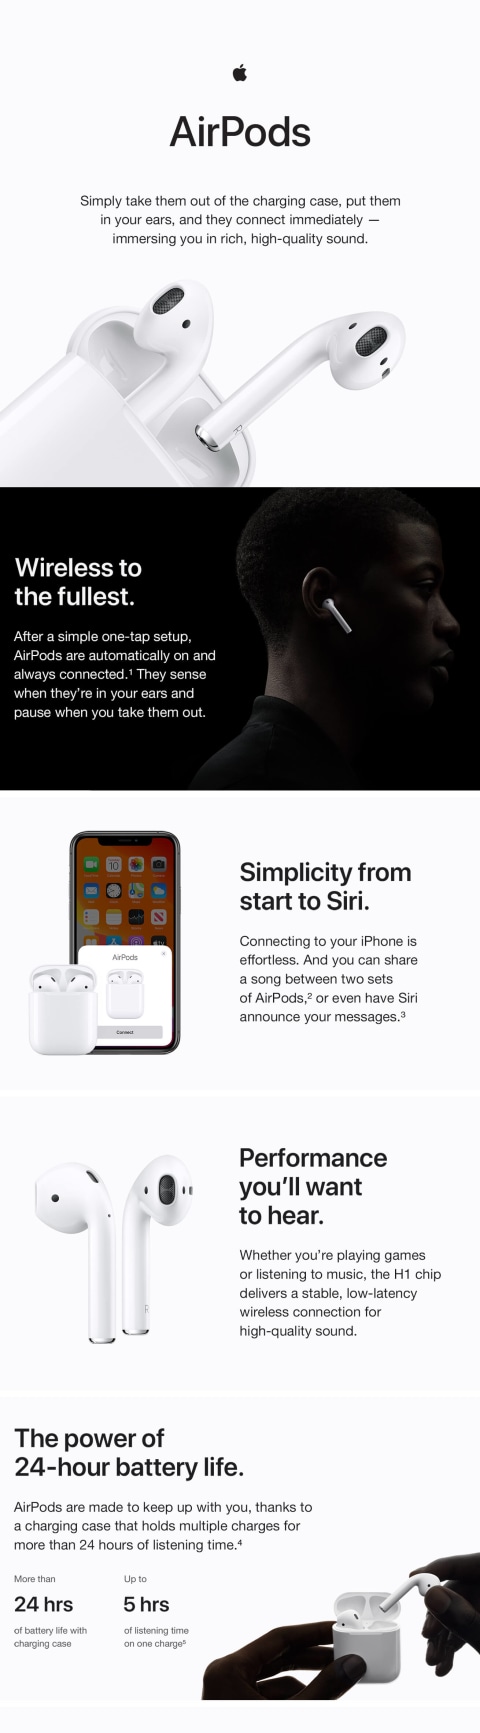 480 Apple &Lt;H1&Gt;Apple Airpods (2Nd Generation) - White&Lt;/H1&Gt; &Lt;Div Class=&Quot;Product-Description&Quot;&Gt;With High-Quality Sound, Voice-Activated Siri, And Complete With Charging Case That Provides Over 24 Hours Of Listening Time, Airpods Deliver An Unparalleled Wireless Headphone Experience. They’re Ready To Use With All Of Your Devices. Put Them In Your Ears And They Connect Immediately, Immersing You In Rich, High-Quality Sound. Just Like Magic.&Lt;/Div&Gt; Airpods Apple Airpods (2Nd Generation) - White (Mv7N2)